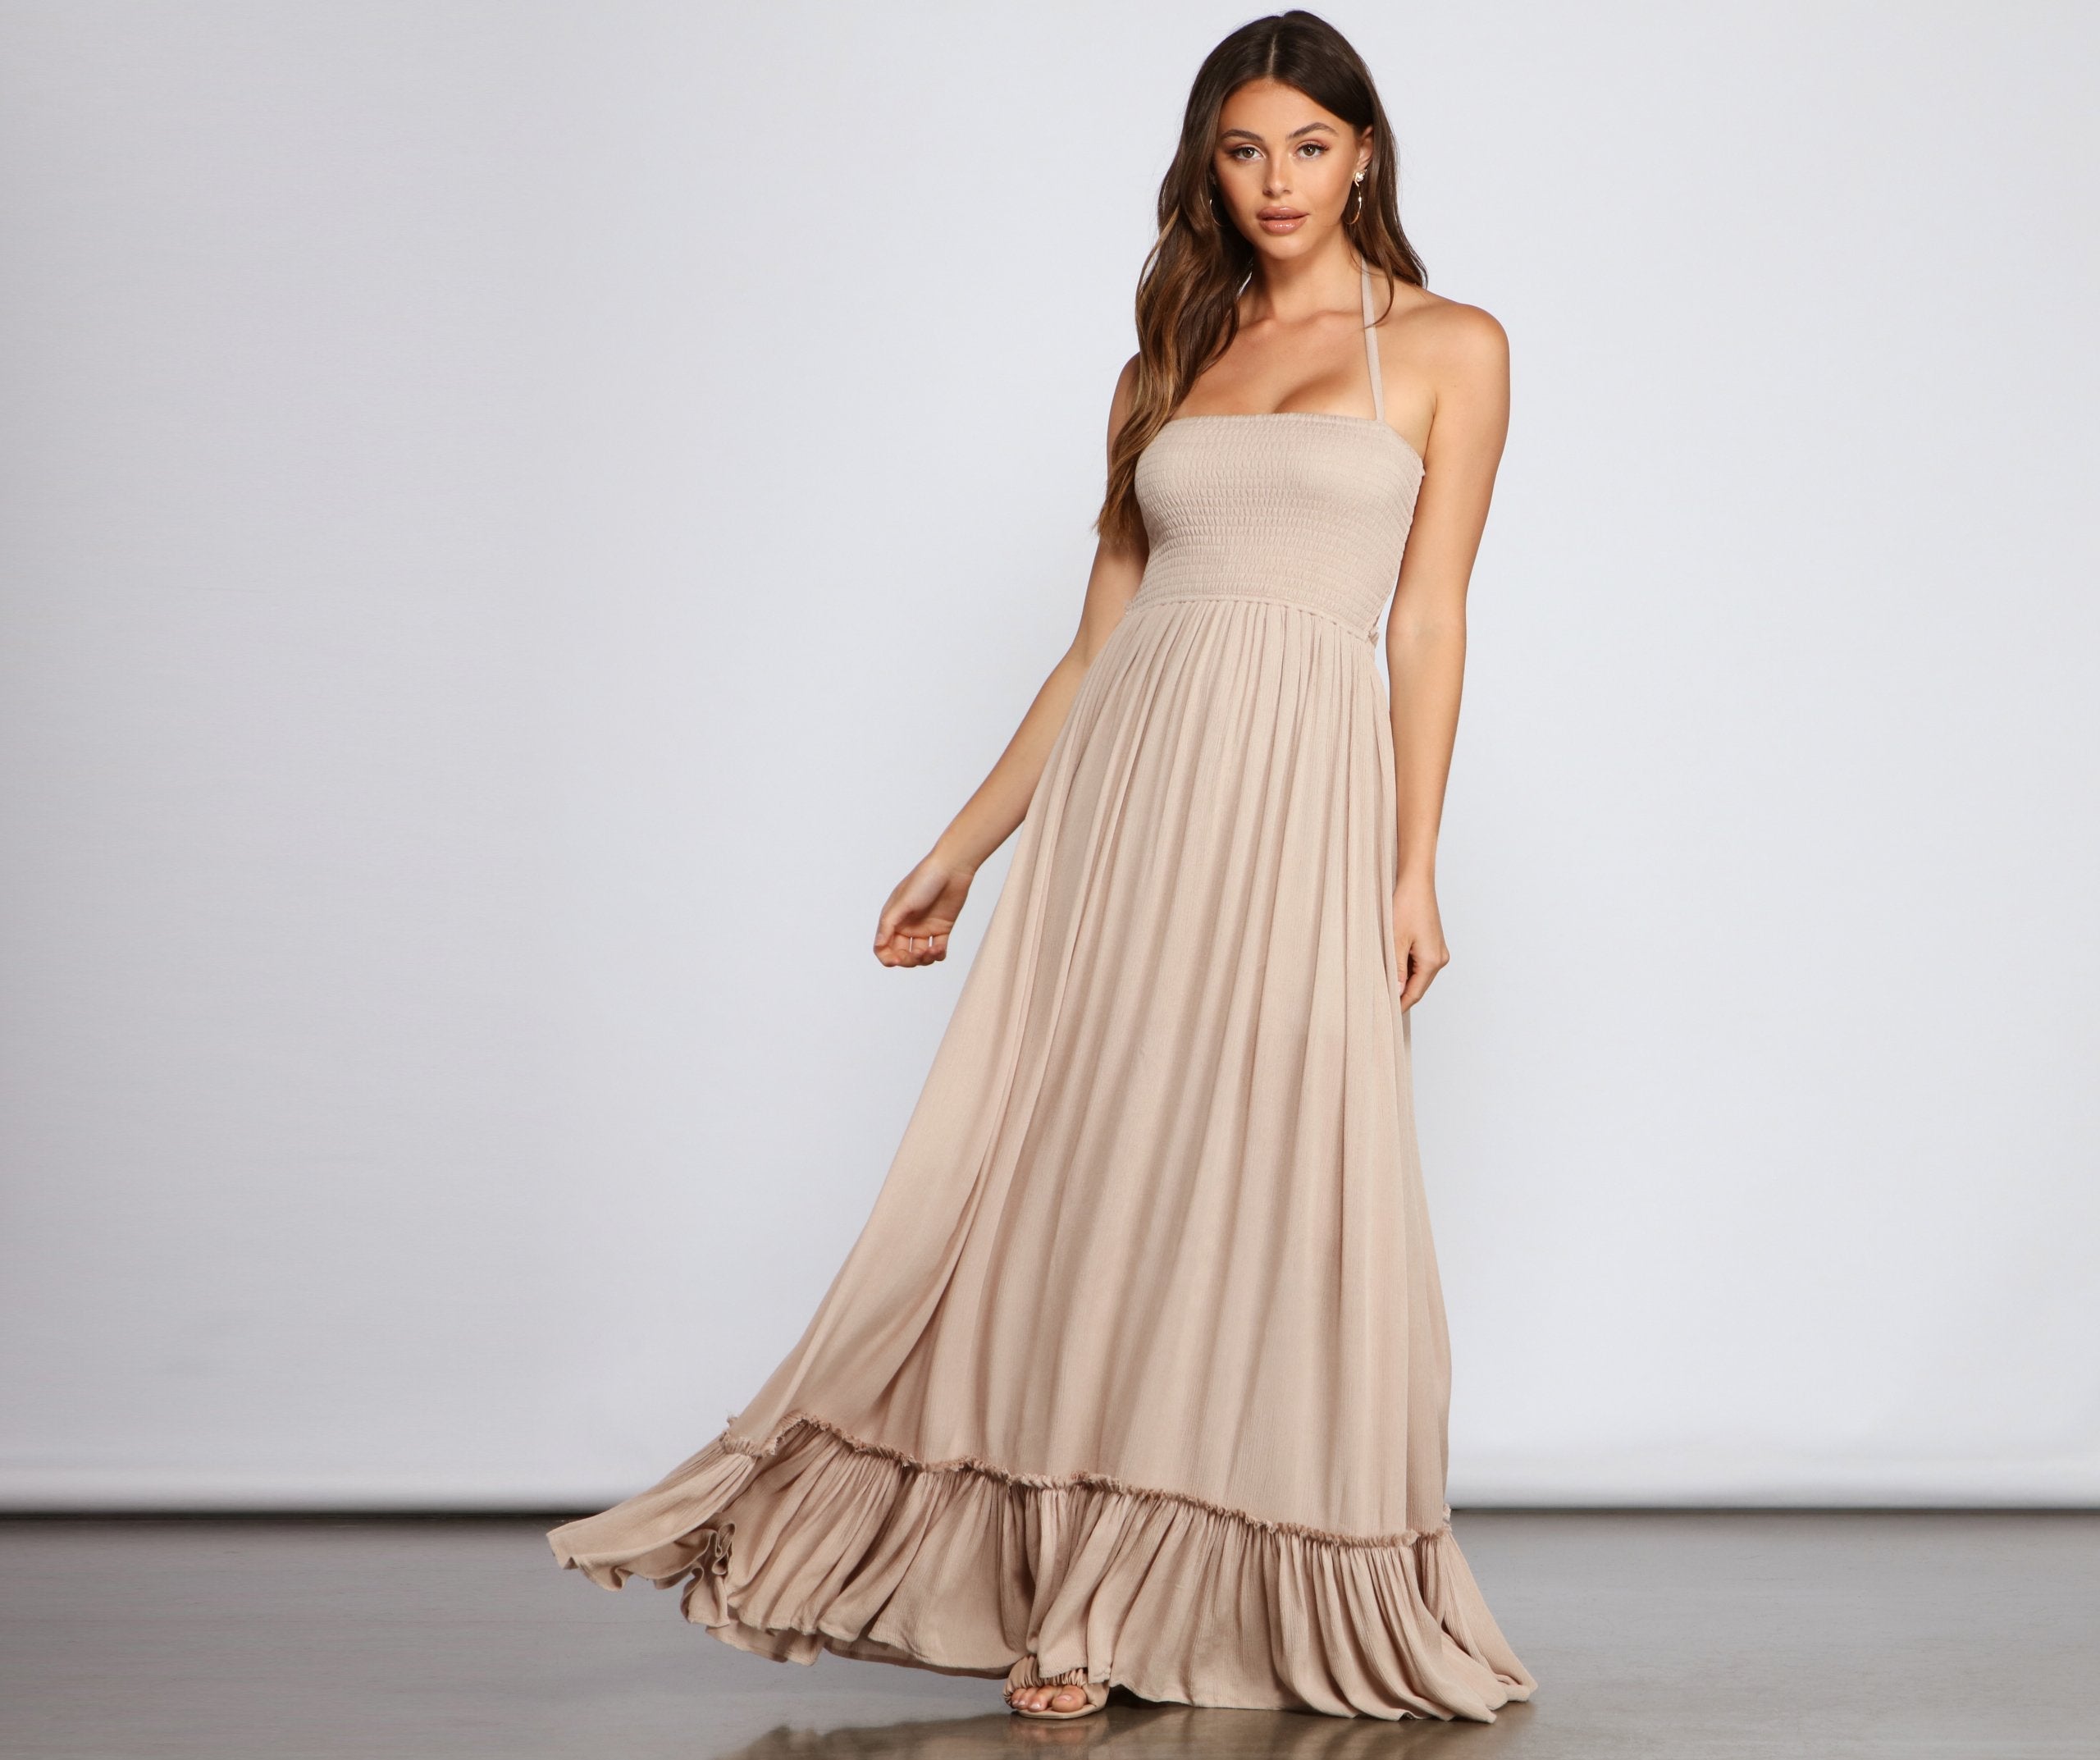 Go With The Flow Smocked Maxi Dress